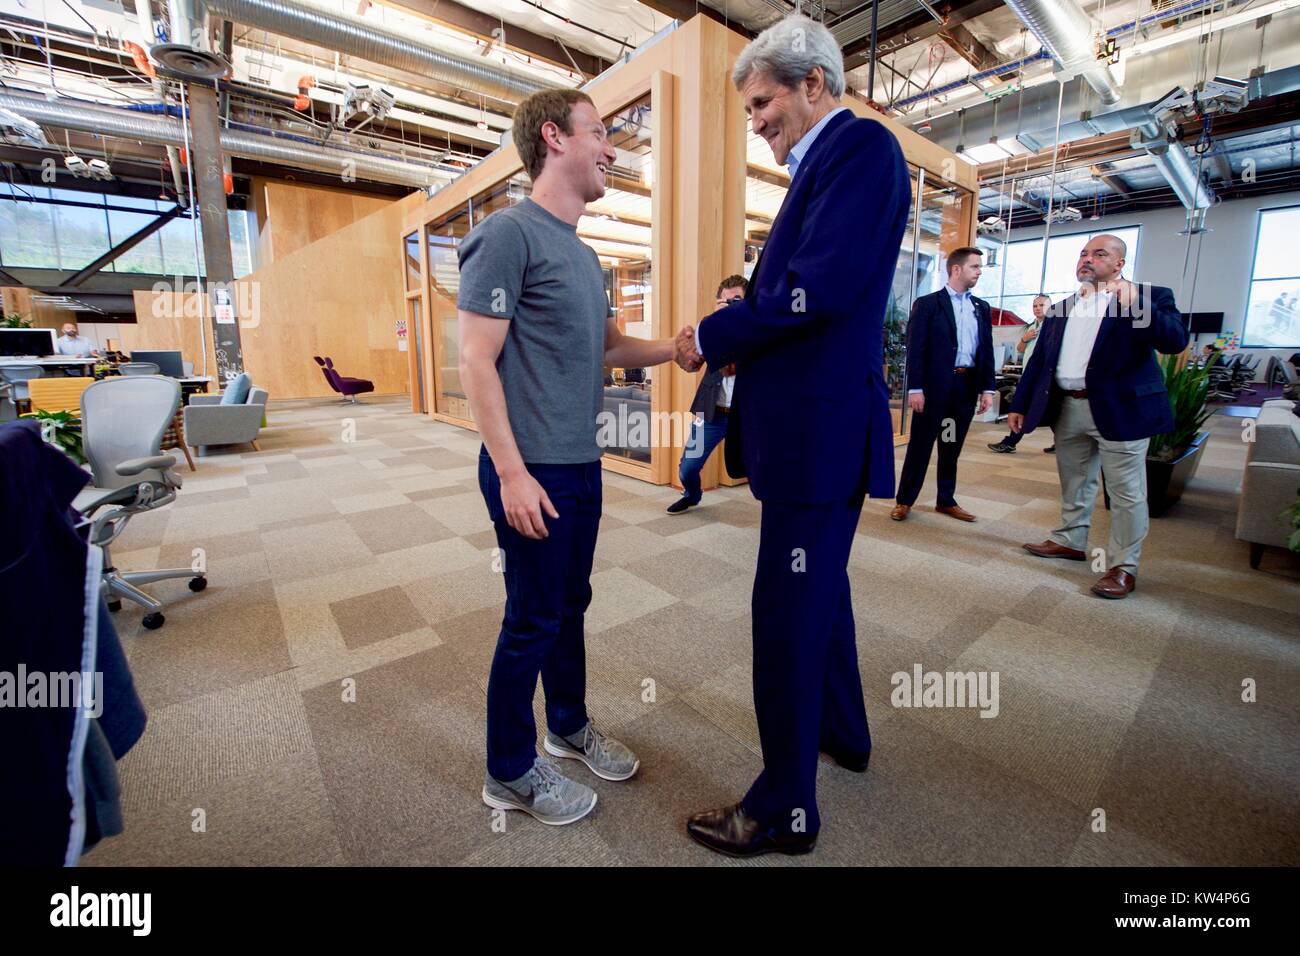 US Secretary of State John Kerry shaking hands with Facebook CEO Mark Zuckerberg at Facebook headquarters, Menlo Park, California, June 23, 2016. Image courtesy US Department of State. Stock Photo